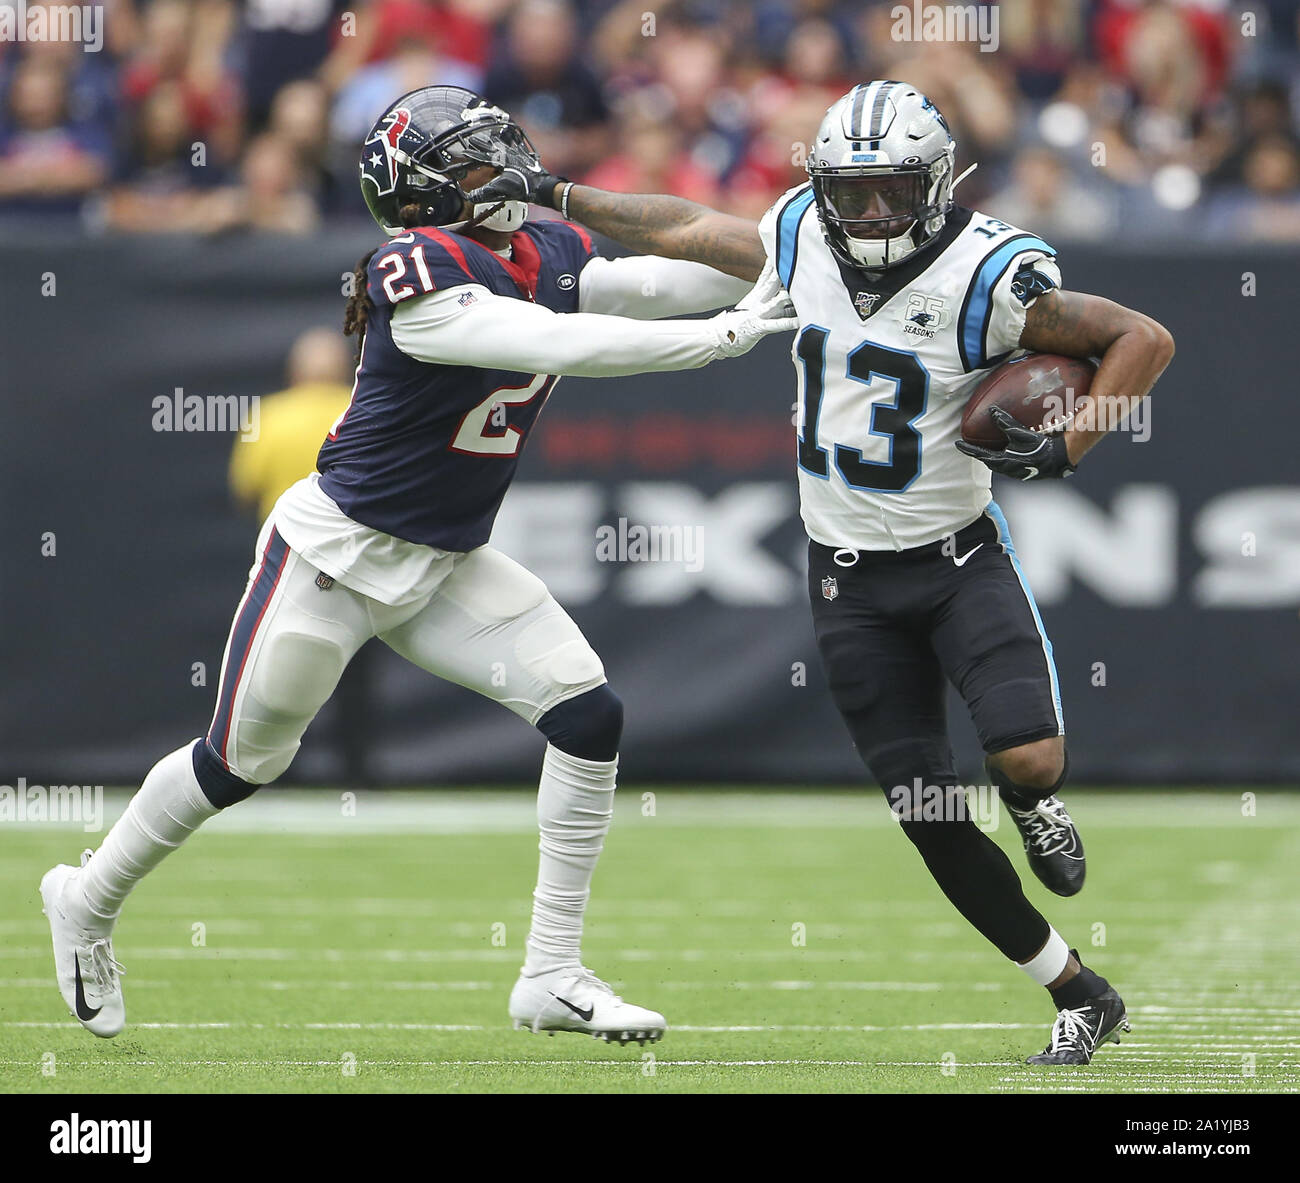 Houston, Texas, USA. 29th Sep, 2019. Houston Texans cornerback Bradley Roby (21) forces Carolina Panthers wide receiver Jarius Wright (13) out of bounds after a catch during an NFL game between the Houston Texans and the Carolina Panthers at NRG Stadium in Houston, Texas, on Sept. 29, 2019. Credit: Scott Coleman/ZUMA Wire/Alamy Live News Stock Photo